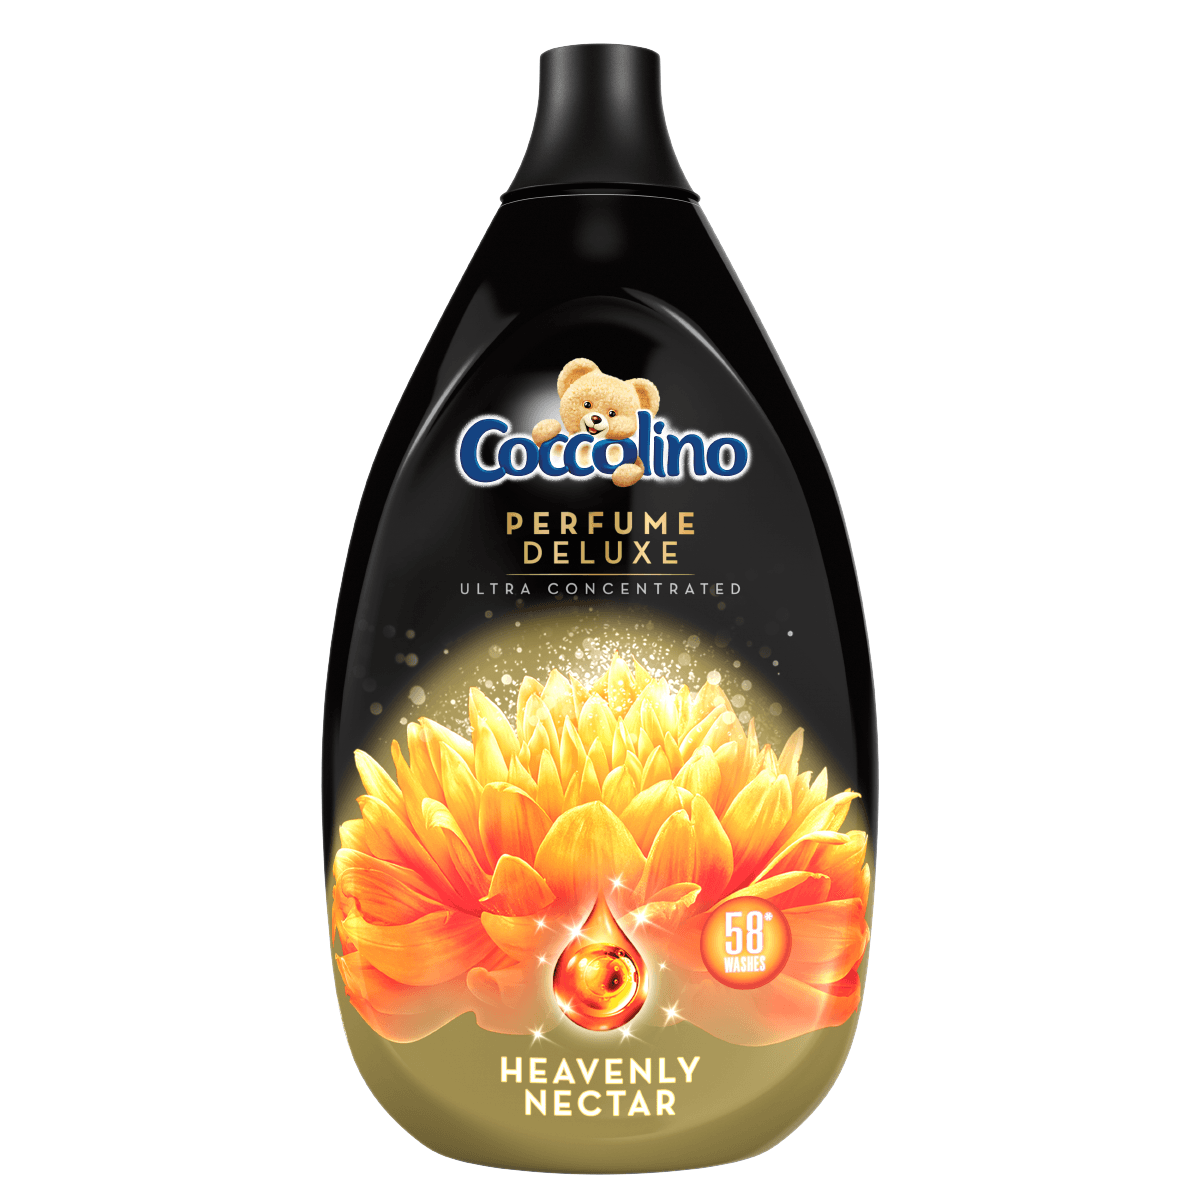 Coccolino Perfume Deluxe 870ml - Heavenly Nectar rinse concentrate